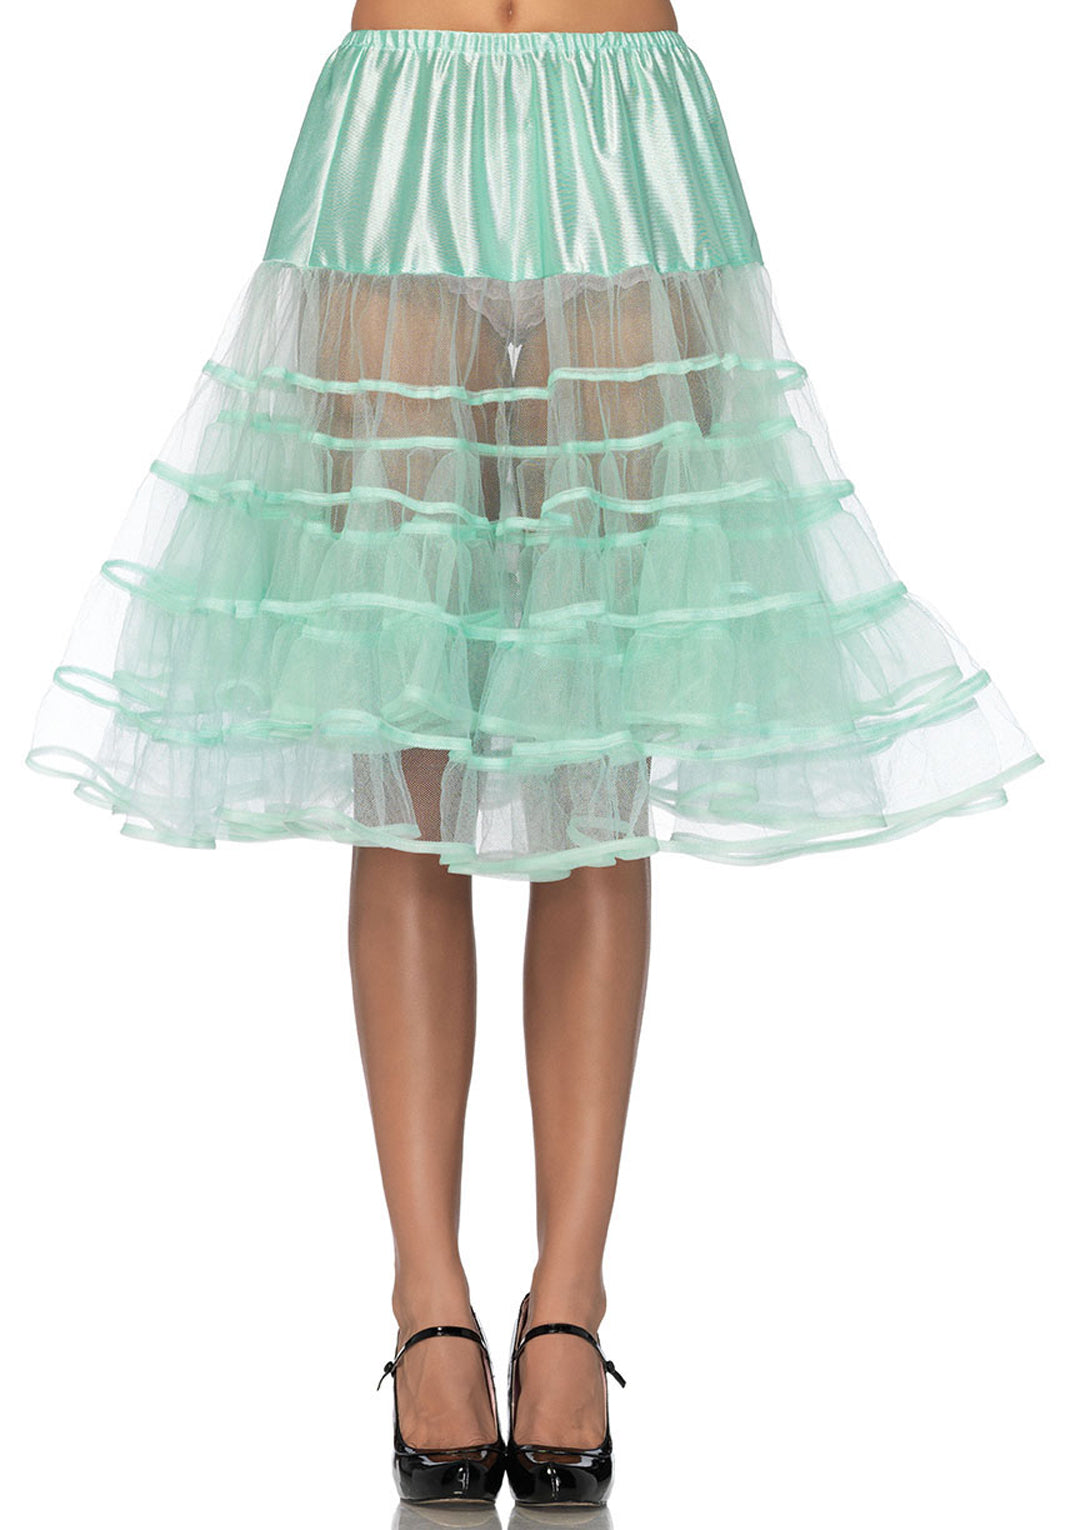 26" length fluffy layered tulle crinoline petticoat in mint green